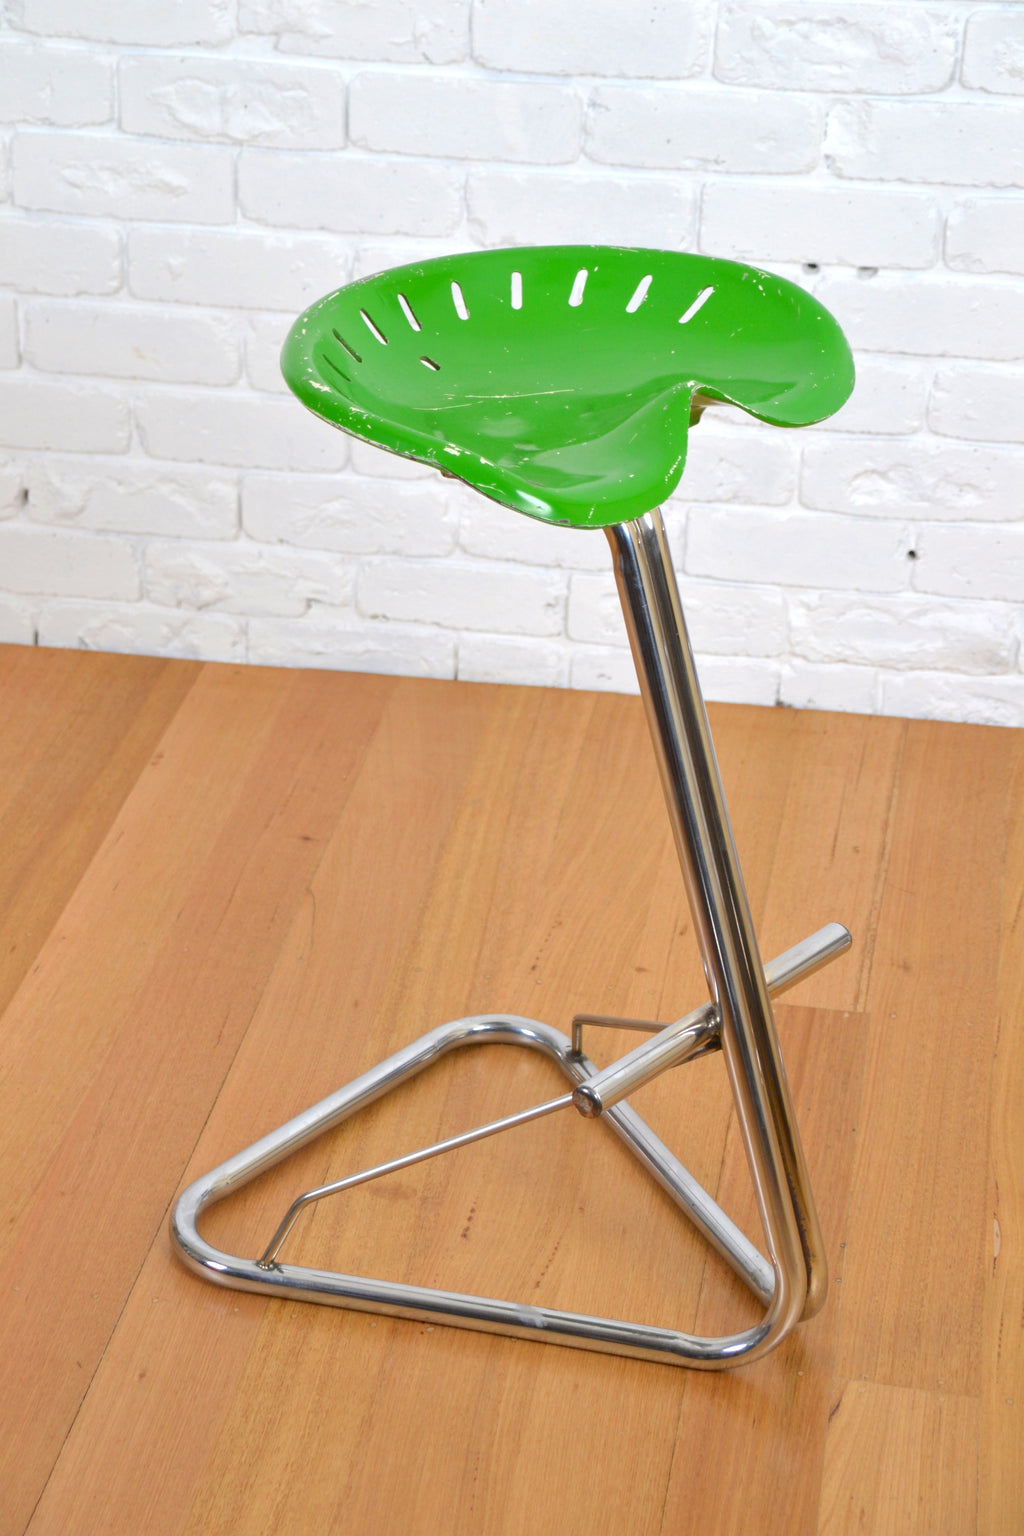 Vintage Rodney Kinsman Tractor stool in green & chrome / abstract furniture art, Vintage, Mid century, Retro, Vintage furniture, mid century furniture, vintage furniture Melbourne, mid century furniture Melbourne, Australian Mid Century, Retro furniture, Retro furniture Melbourne, modern furniture, Danish furniture Melbourne, Danish originals, chairs, armchairs, sofas, lounges, coffee tables, storage, sideboards, genuine Mid century lighting lamps, designer furniture,